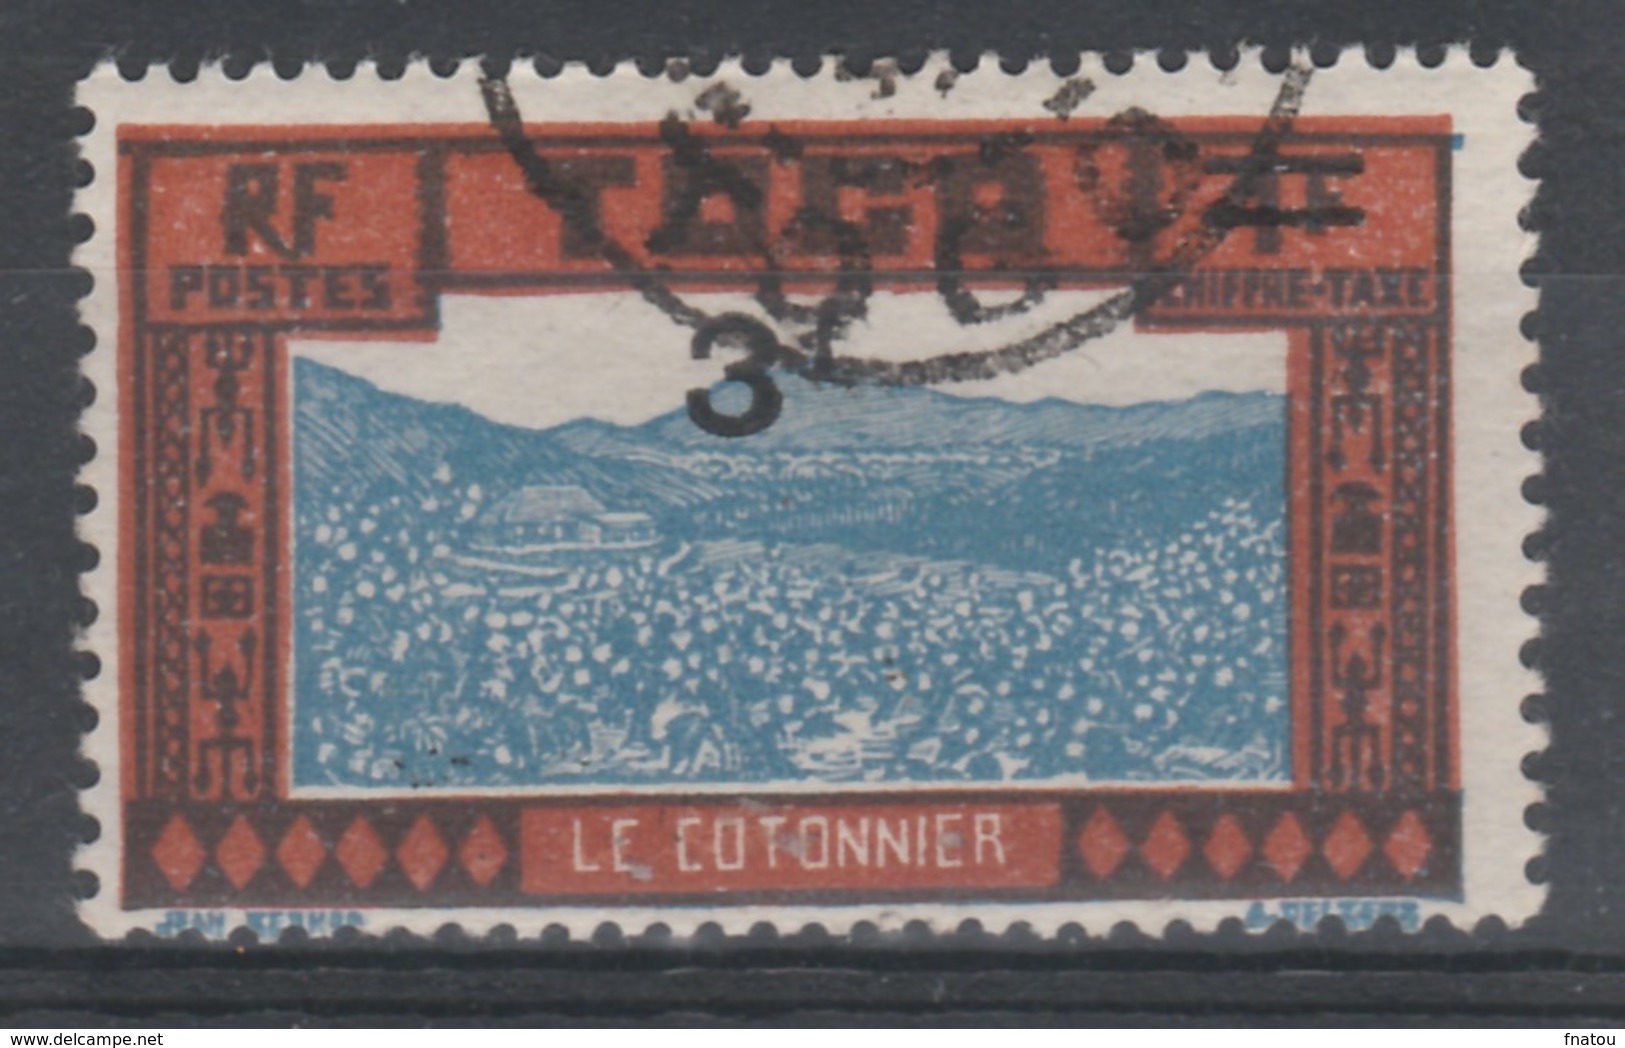 Togo, Cotton Plant, Postage Due, 3f./1f., 1927, VFU - Used Stamps